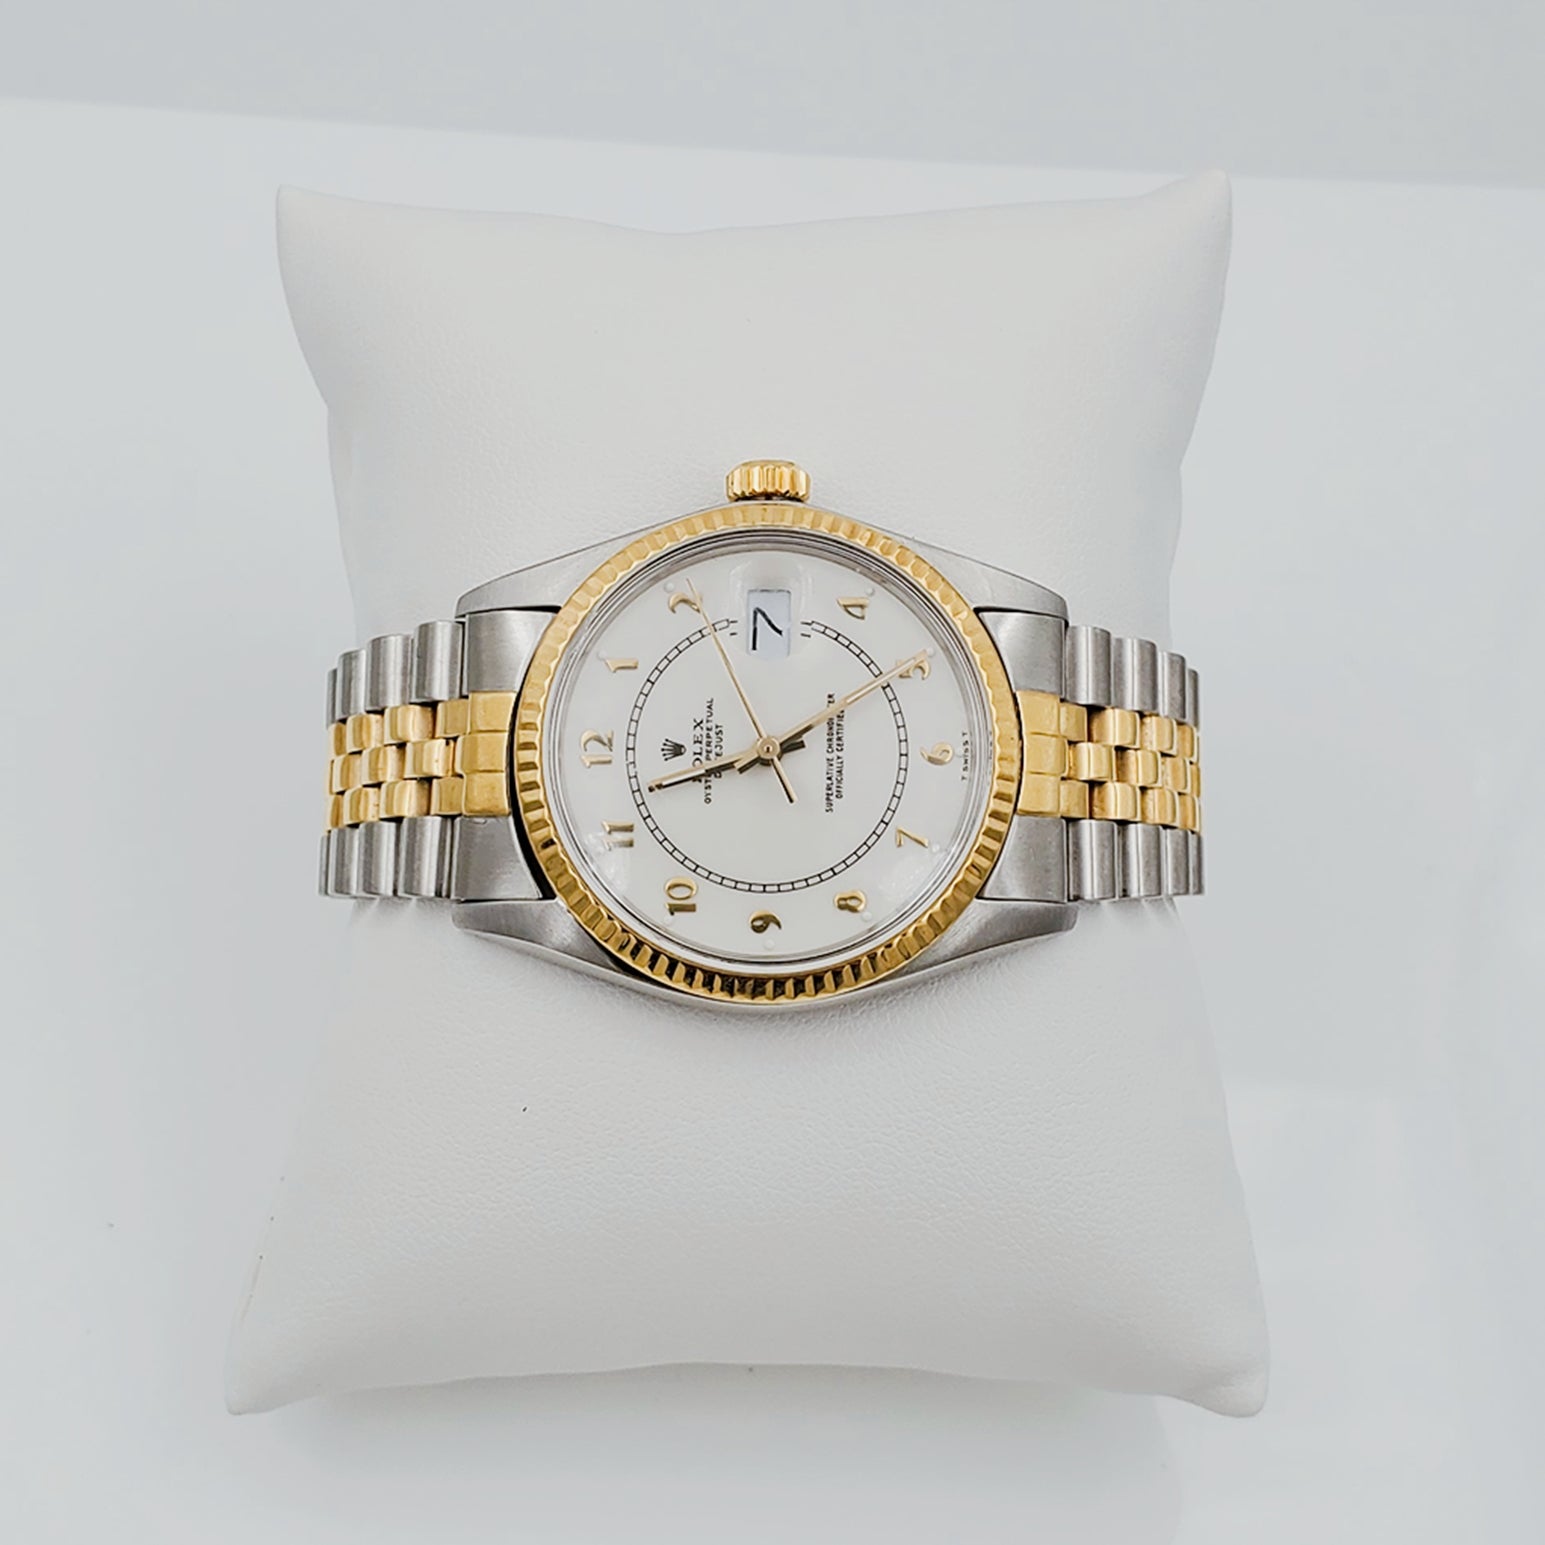 Men's Rolex 36mm DateJust 18k Gold / Stainless Steel Two Tone Watch with Gold Numeral, White Dial and Fluted Bezel. (Pre-Owned)